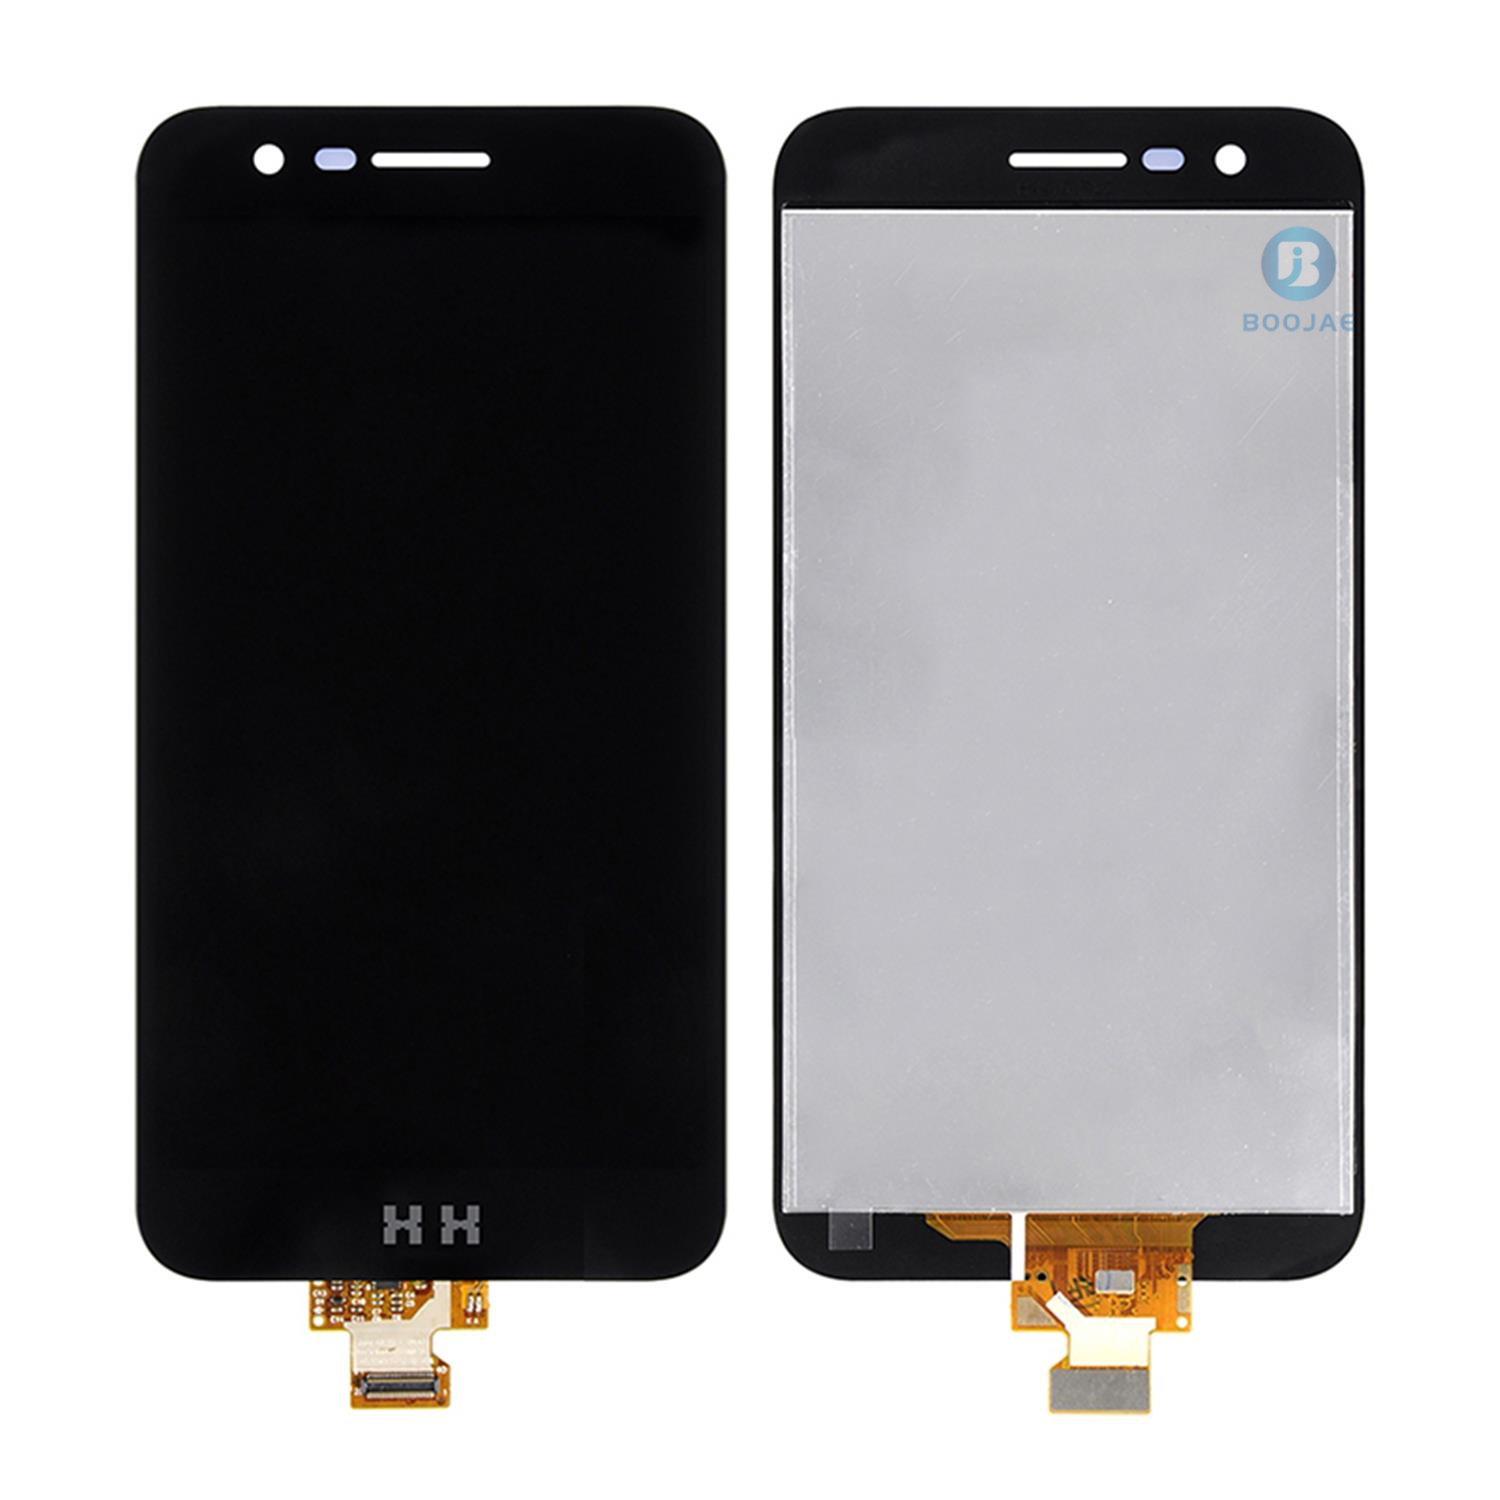 LG K10 2017 LCD Screen Display, Lcd Assembly Replacement